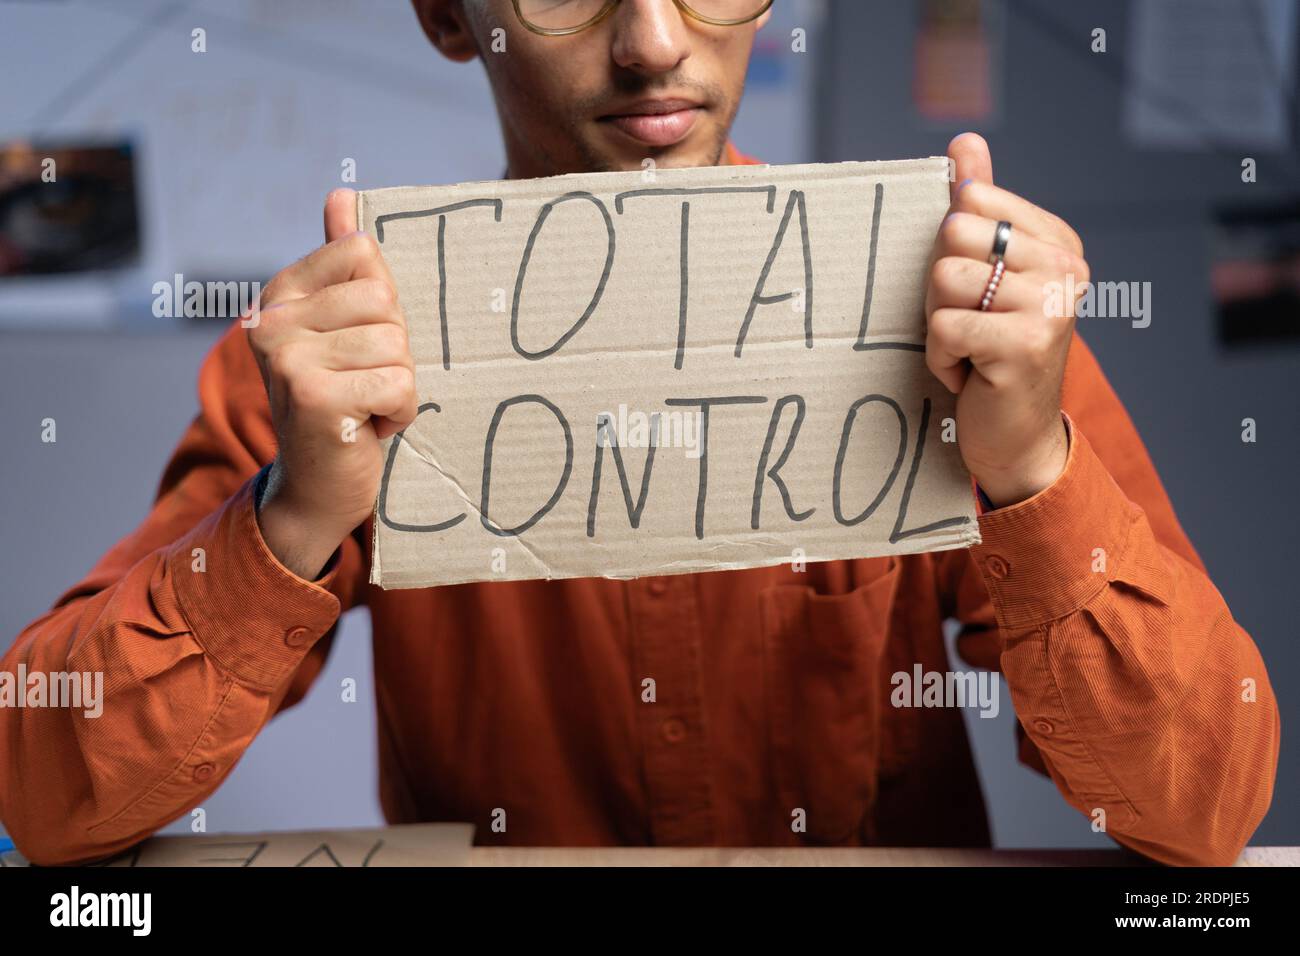 Conspiracy and a man sits and holds a inscription - total control in his hands. Conspiracy theorist and fake news. Politics and conspiracy theory. Stock Photo